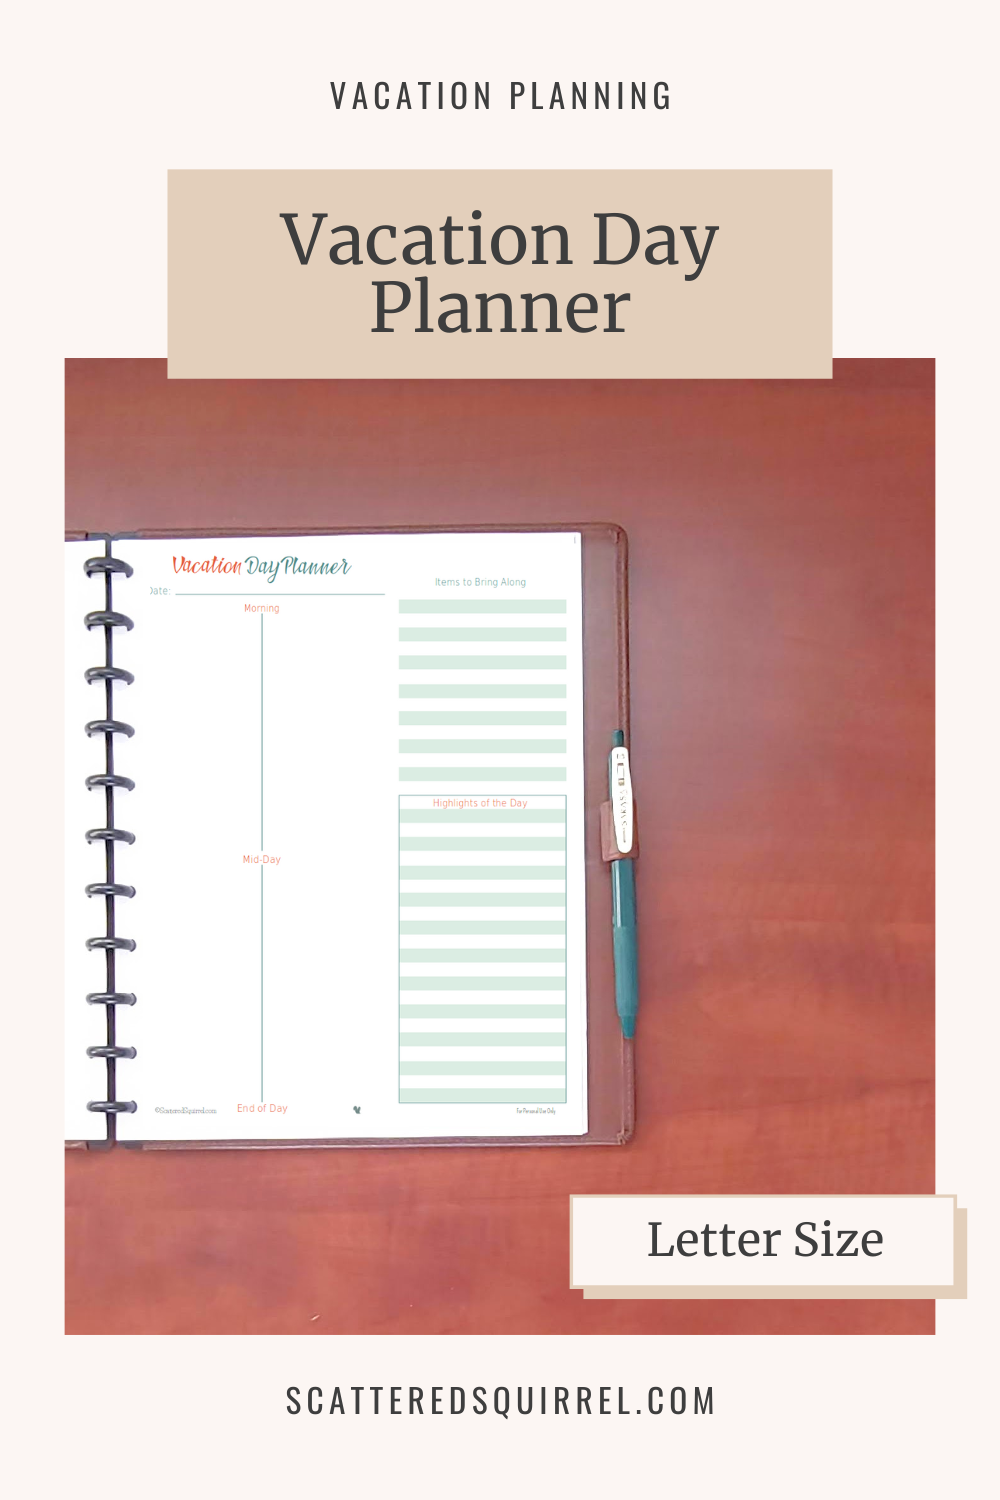 This image links to the letter size, Vacation Day Planner printable PDF.